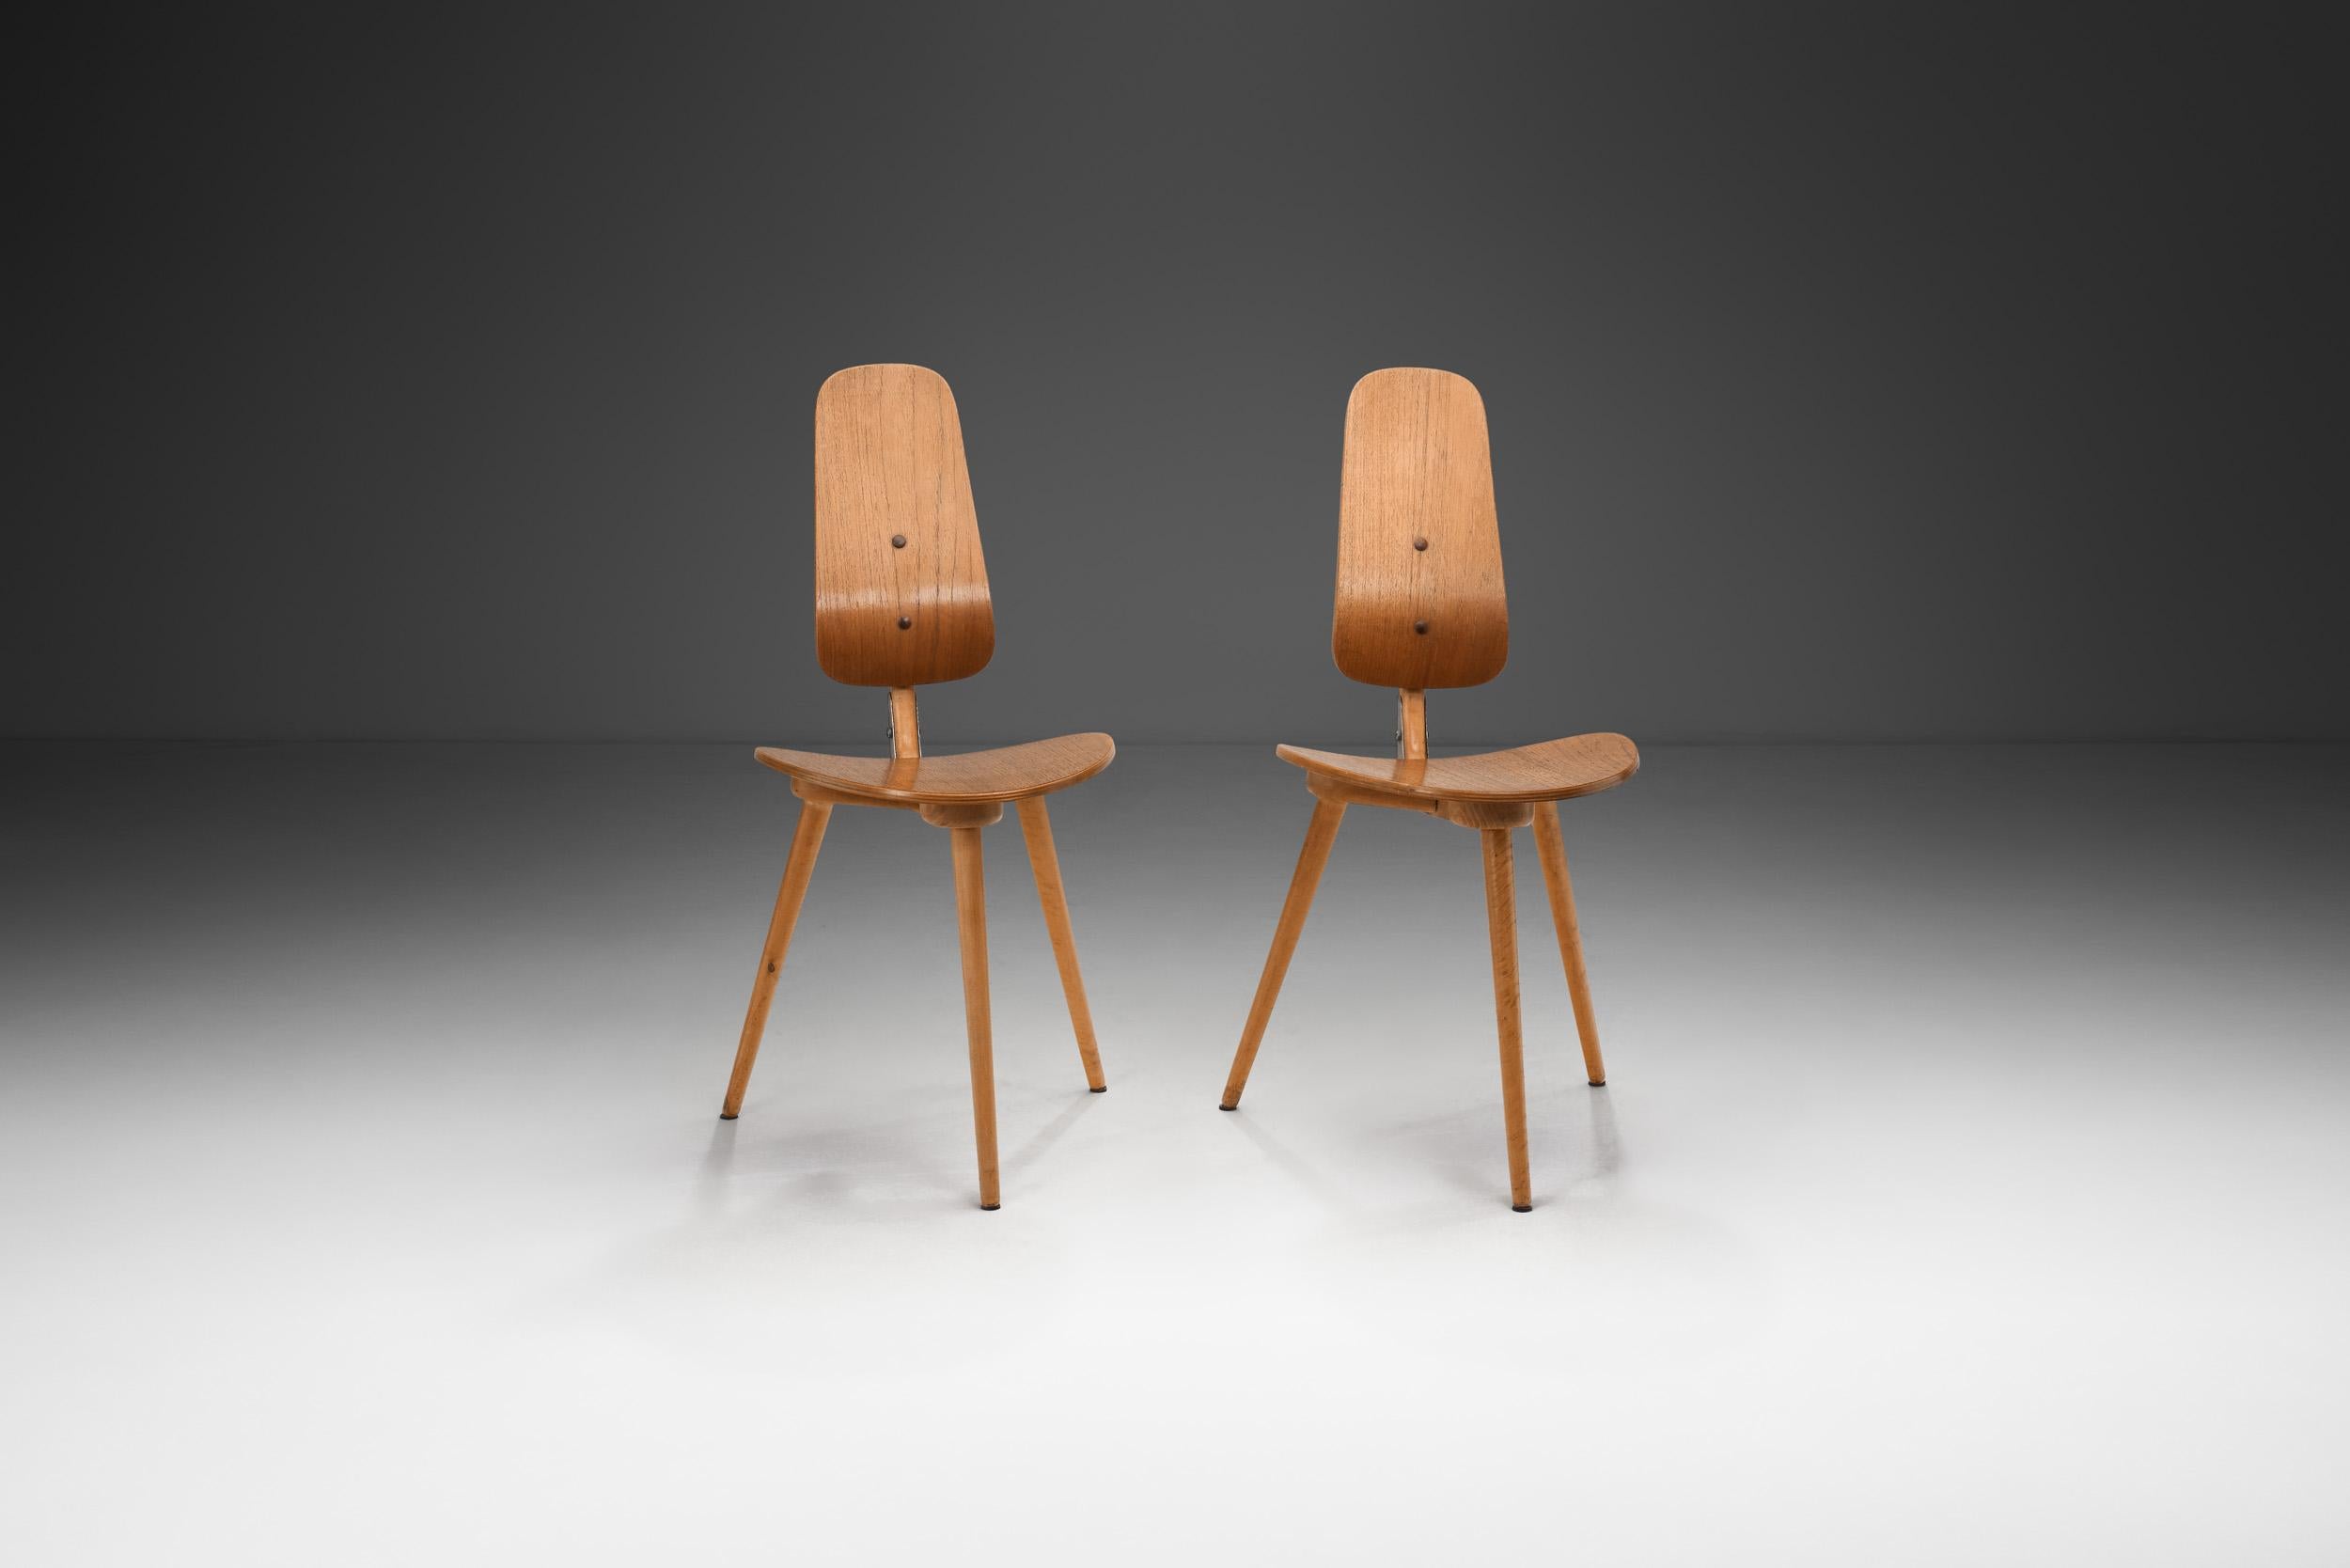 Swedish Pair of “Grill” Chairs by Bengt Ruda for Ikea, Sweden 1958 For Sale